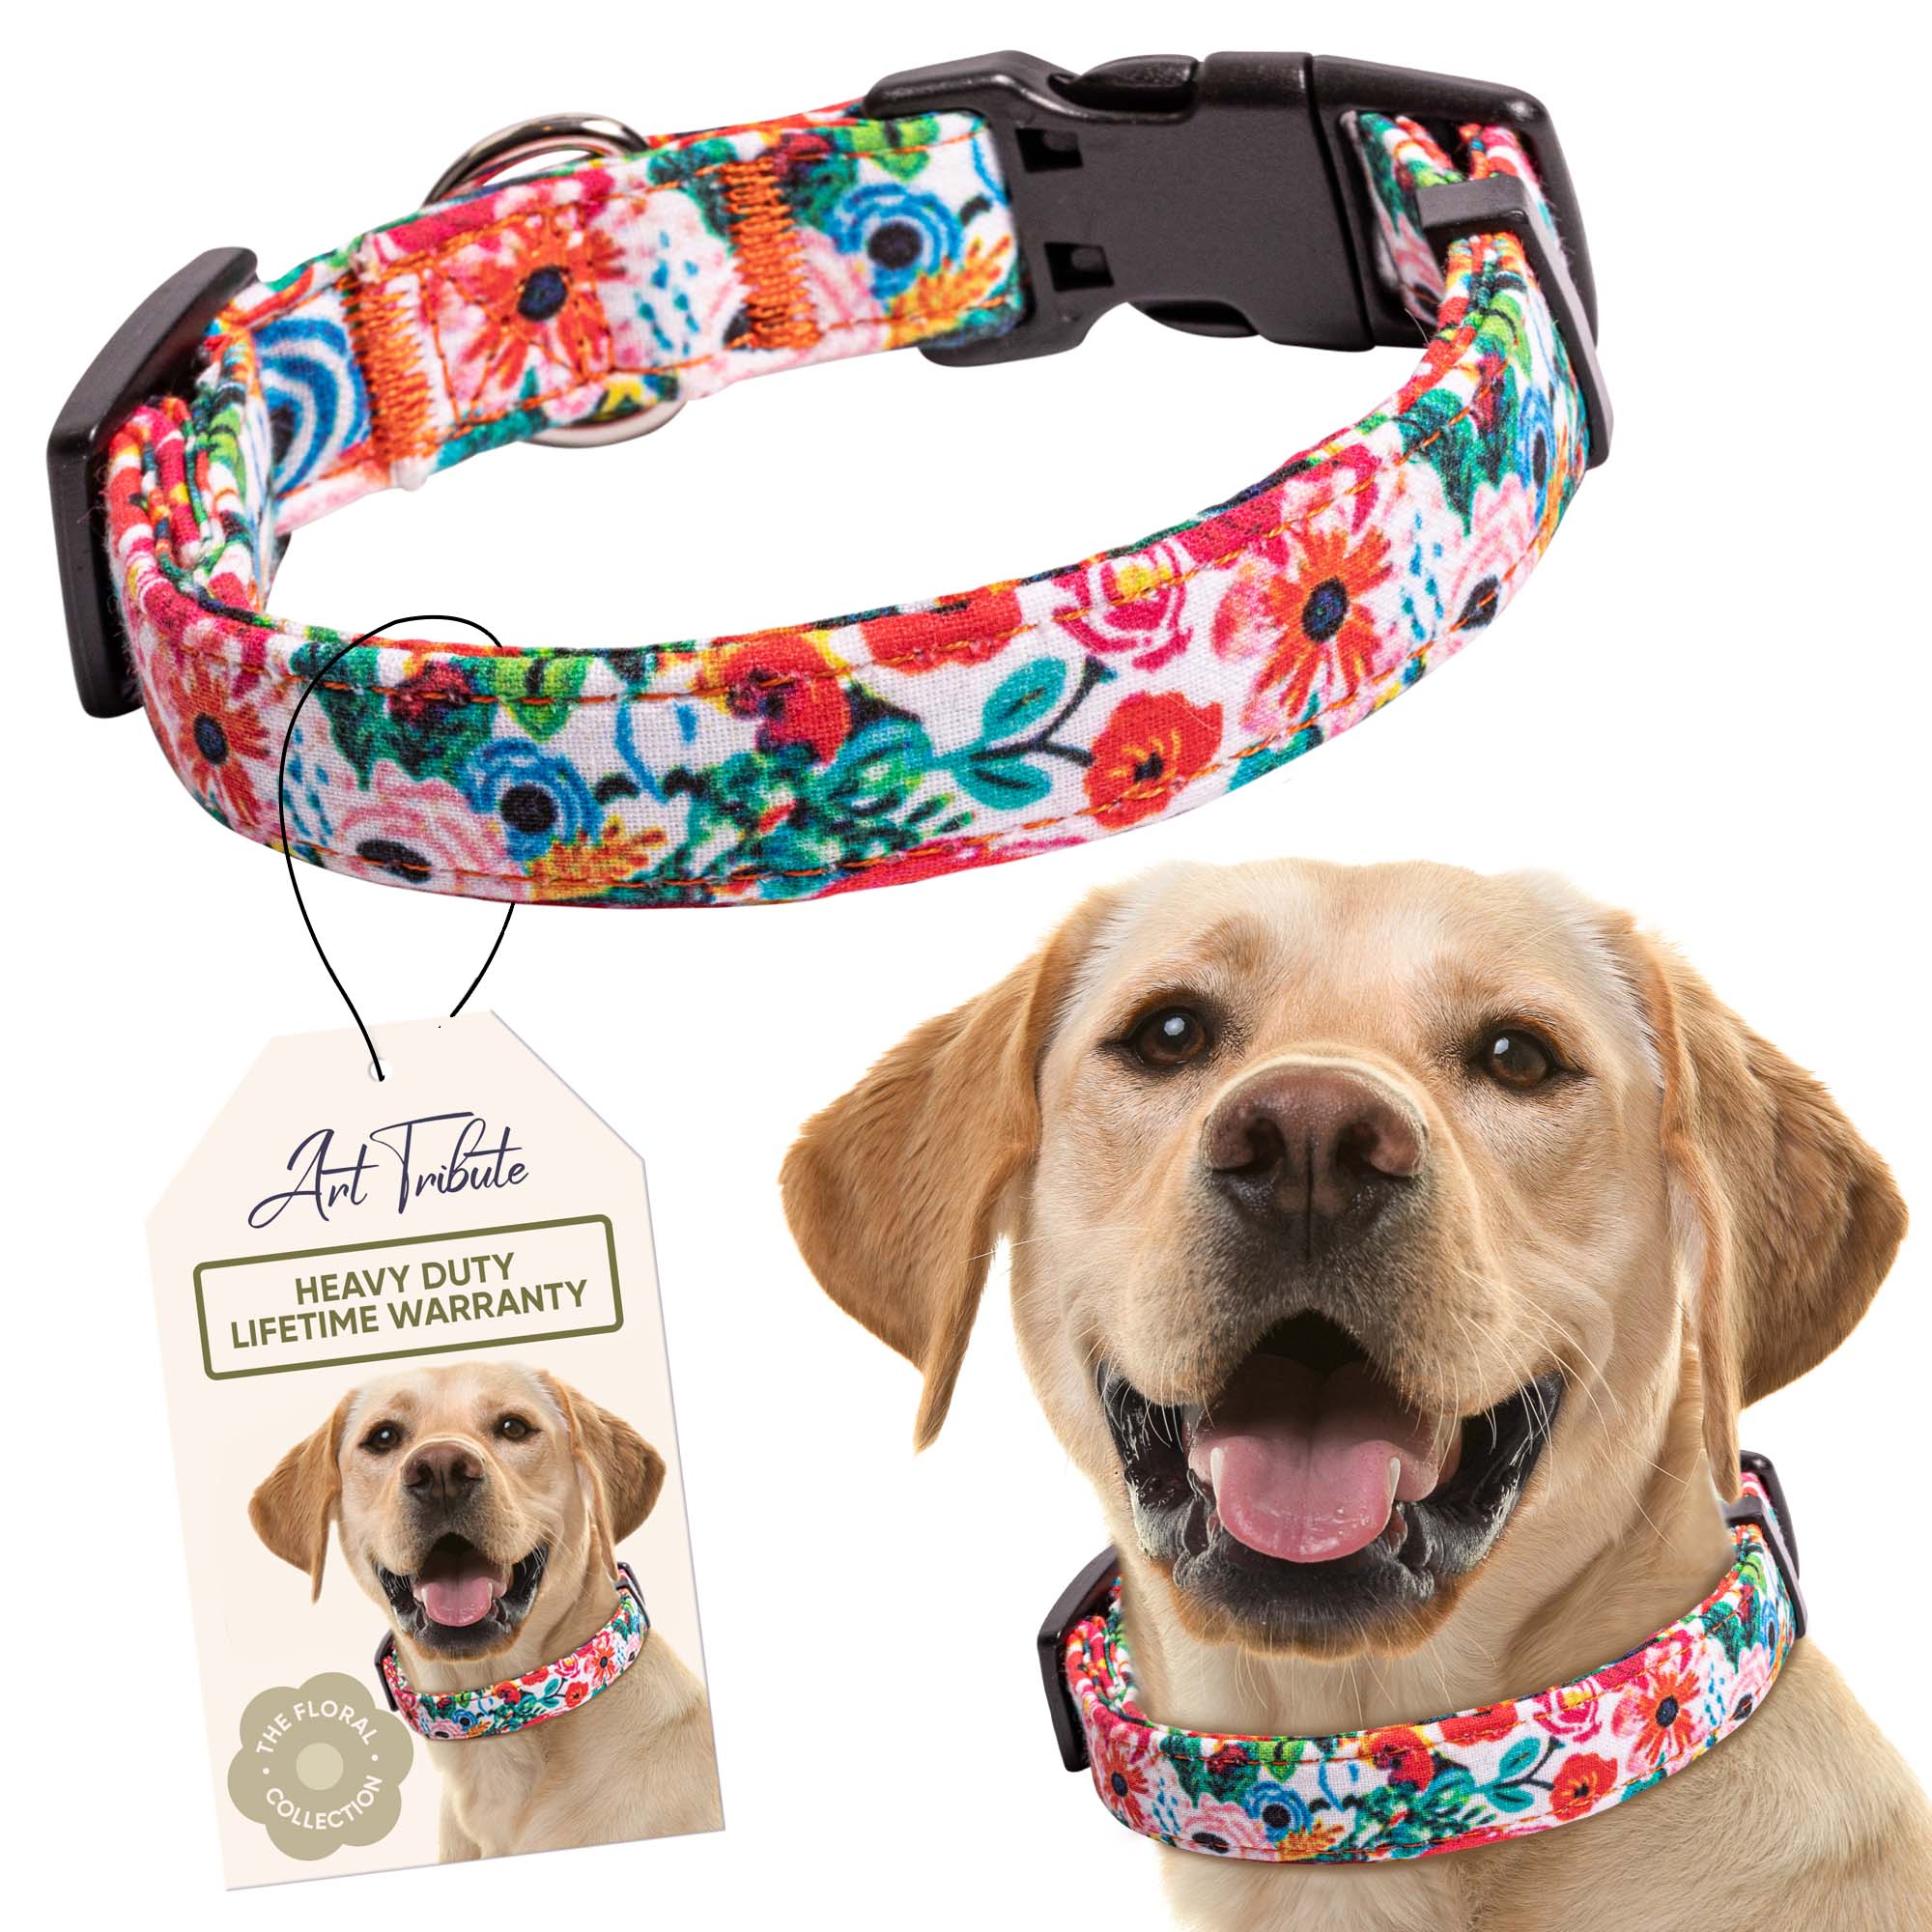 Floral Dog Collar foe samll, medium and large dogs. Quick release, durable and strong collar